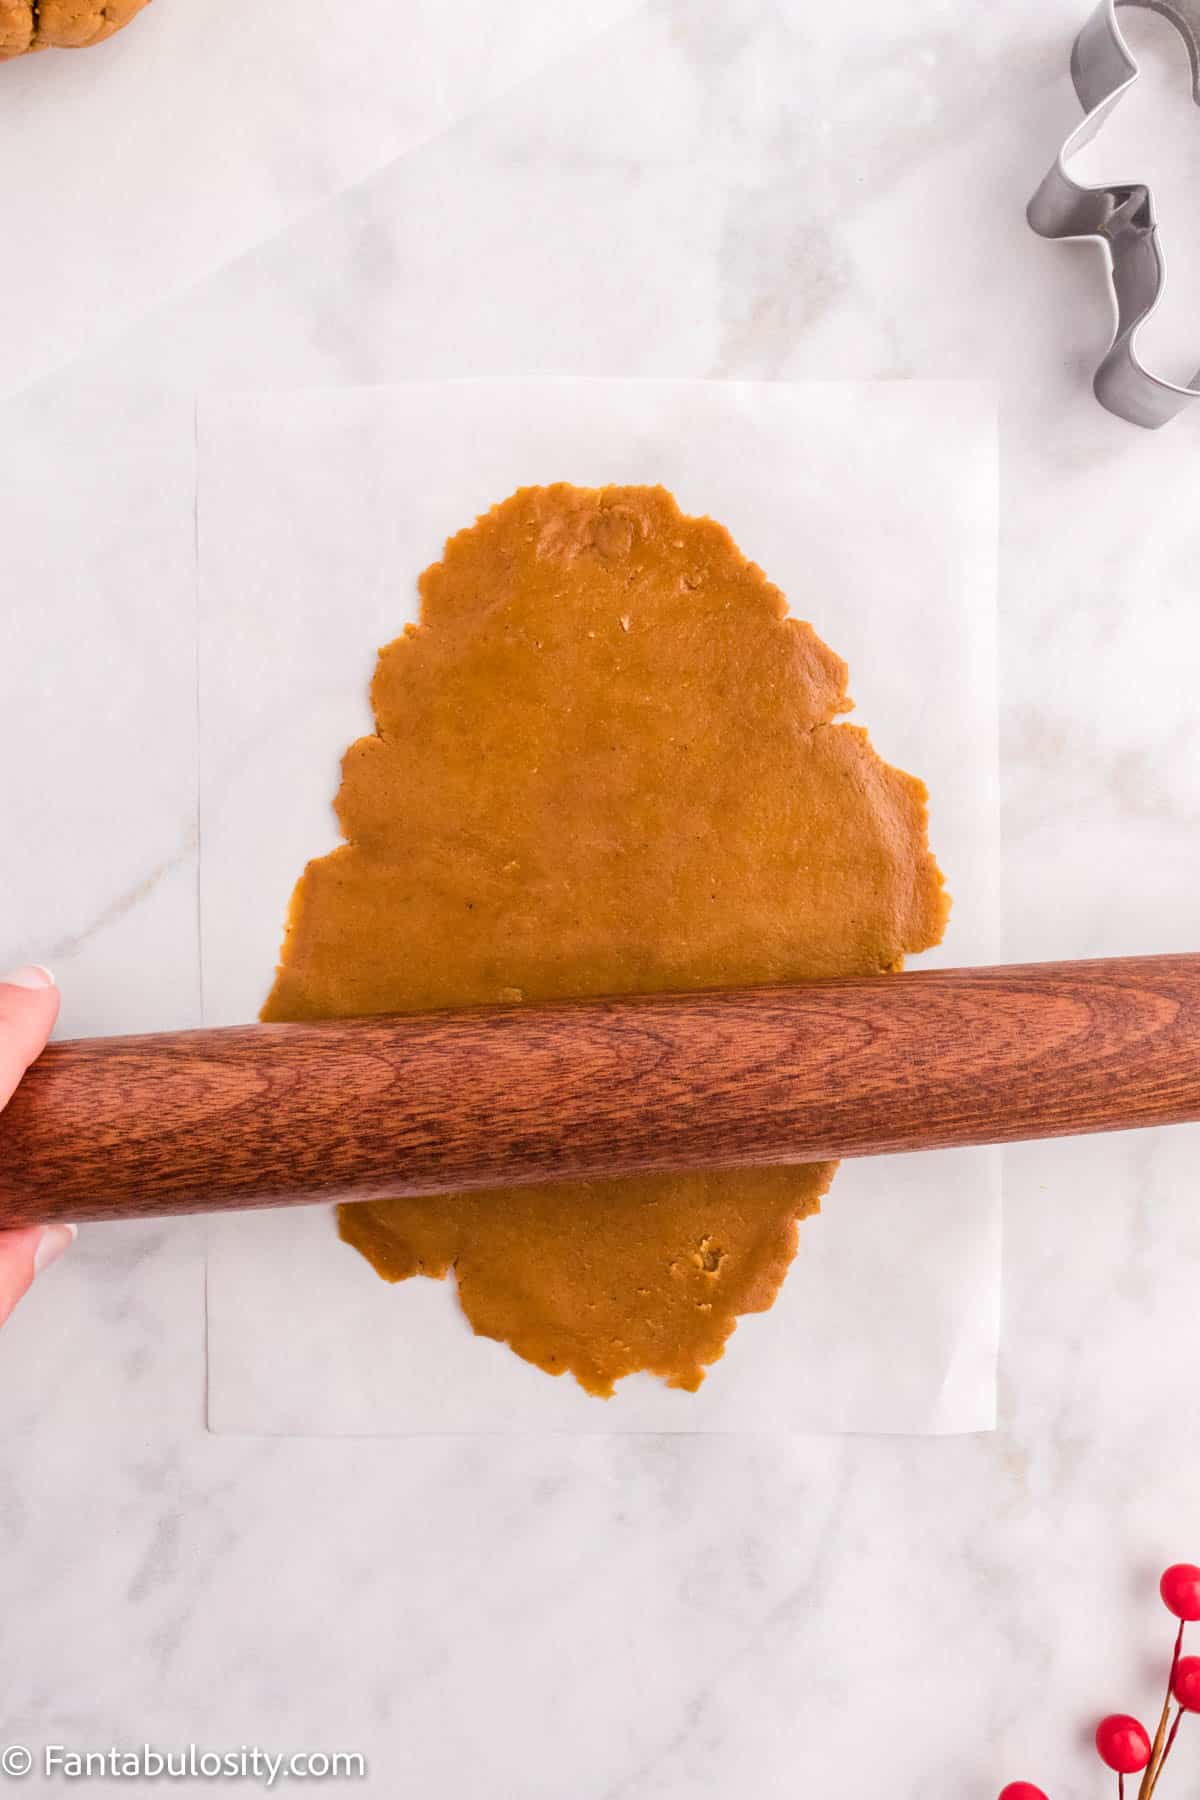 Cookie dough is being rolled out on parchment paper with a wooden rolling pin